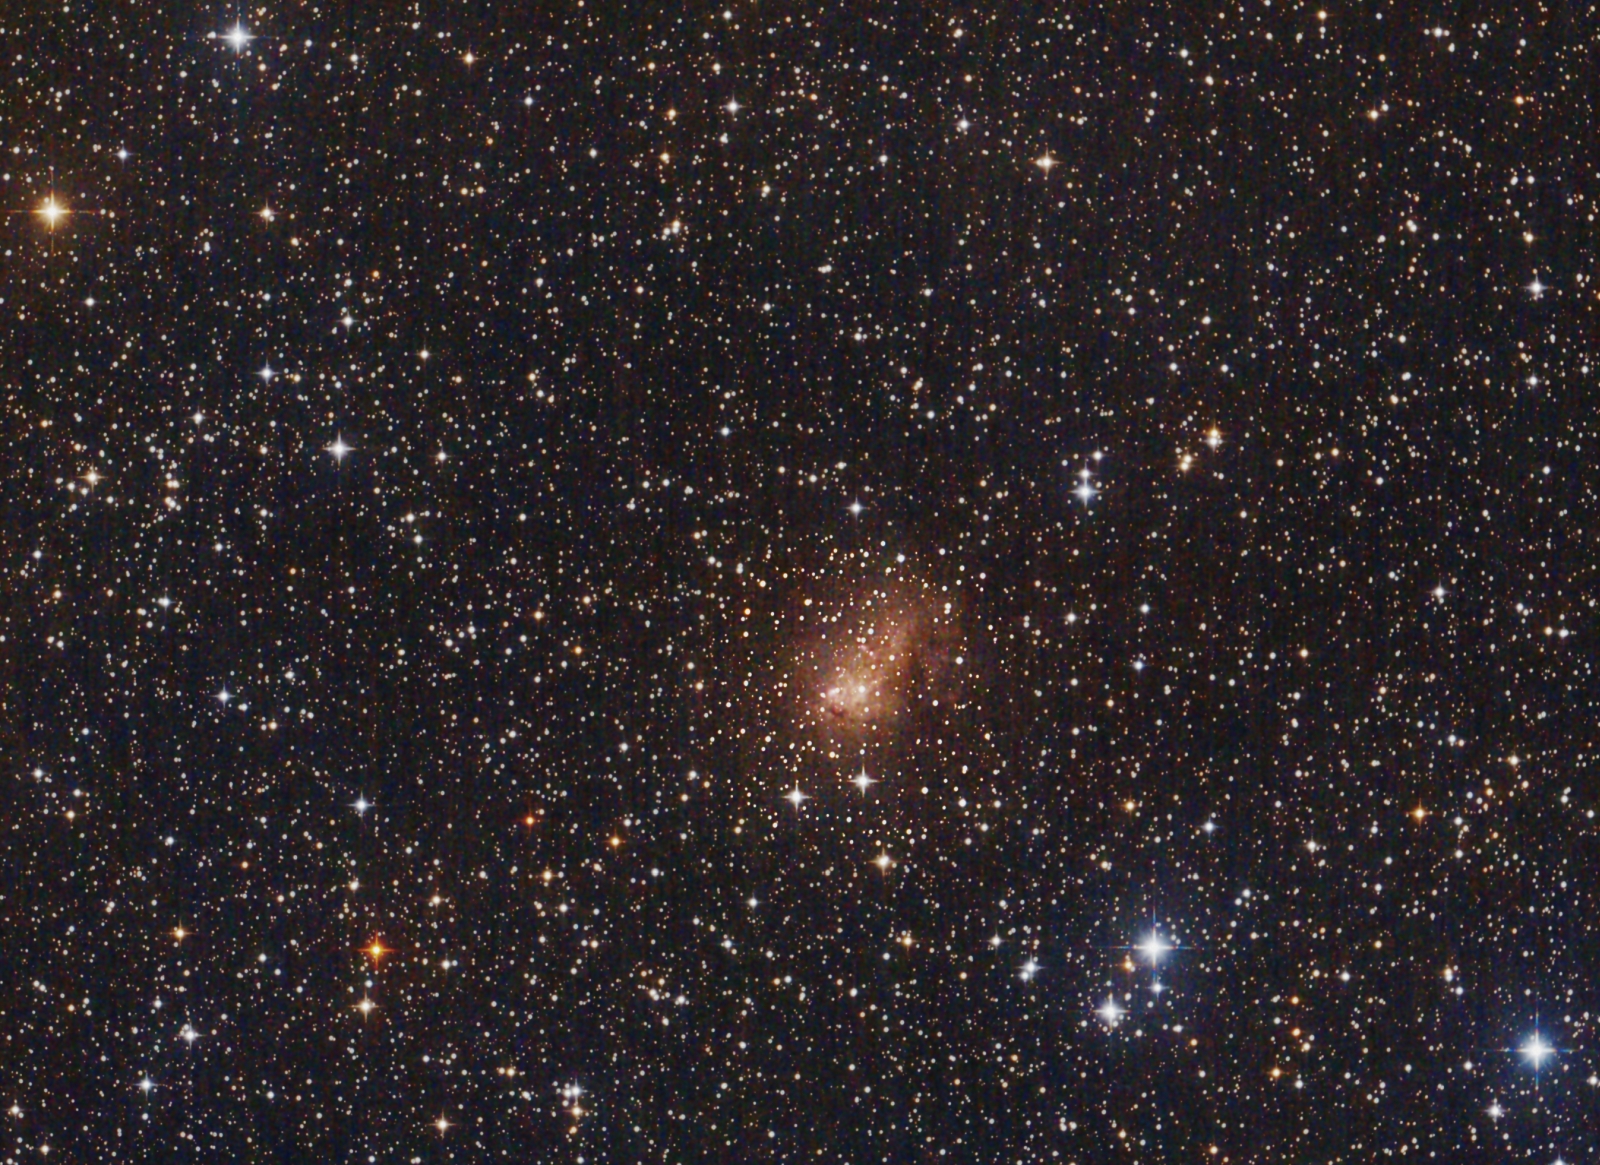 Galaxy IC 10 in Cassiopeia: 8" f/4 newtonian, mod. Canon 600d; no filter; 2h 39 min in 3 min subs